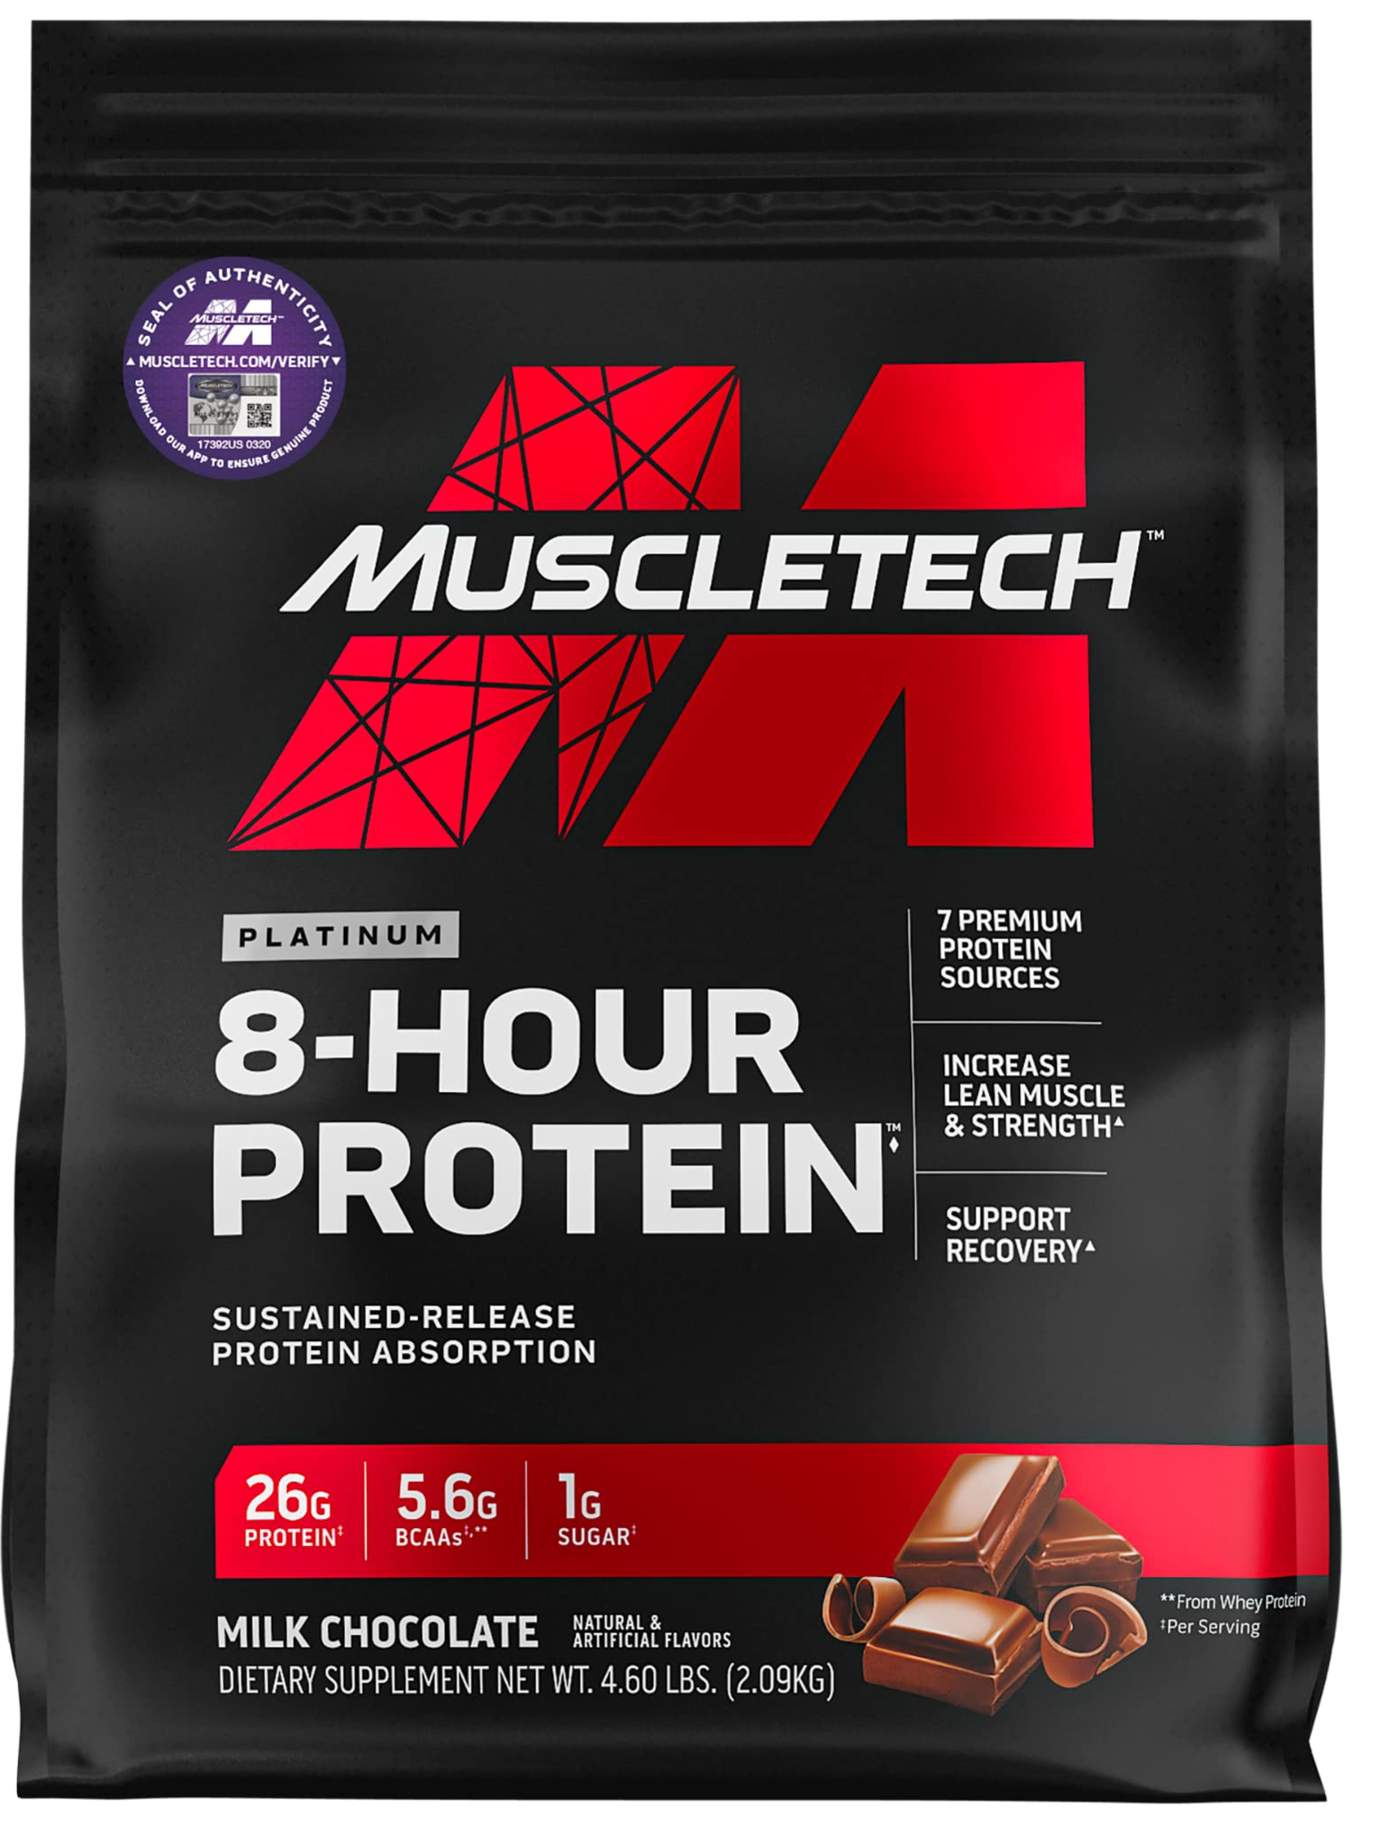 5lb Whey Protein Powder | MuscleTech Phase8 Protein Powder | Whey & Casein Protein Powder Blend | Slow Release 8-Hour Protein Shakes | Chocol - $34.99